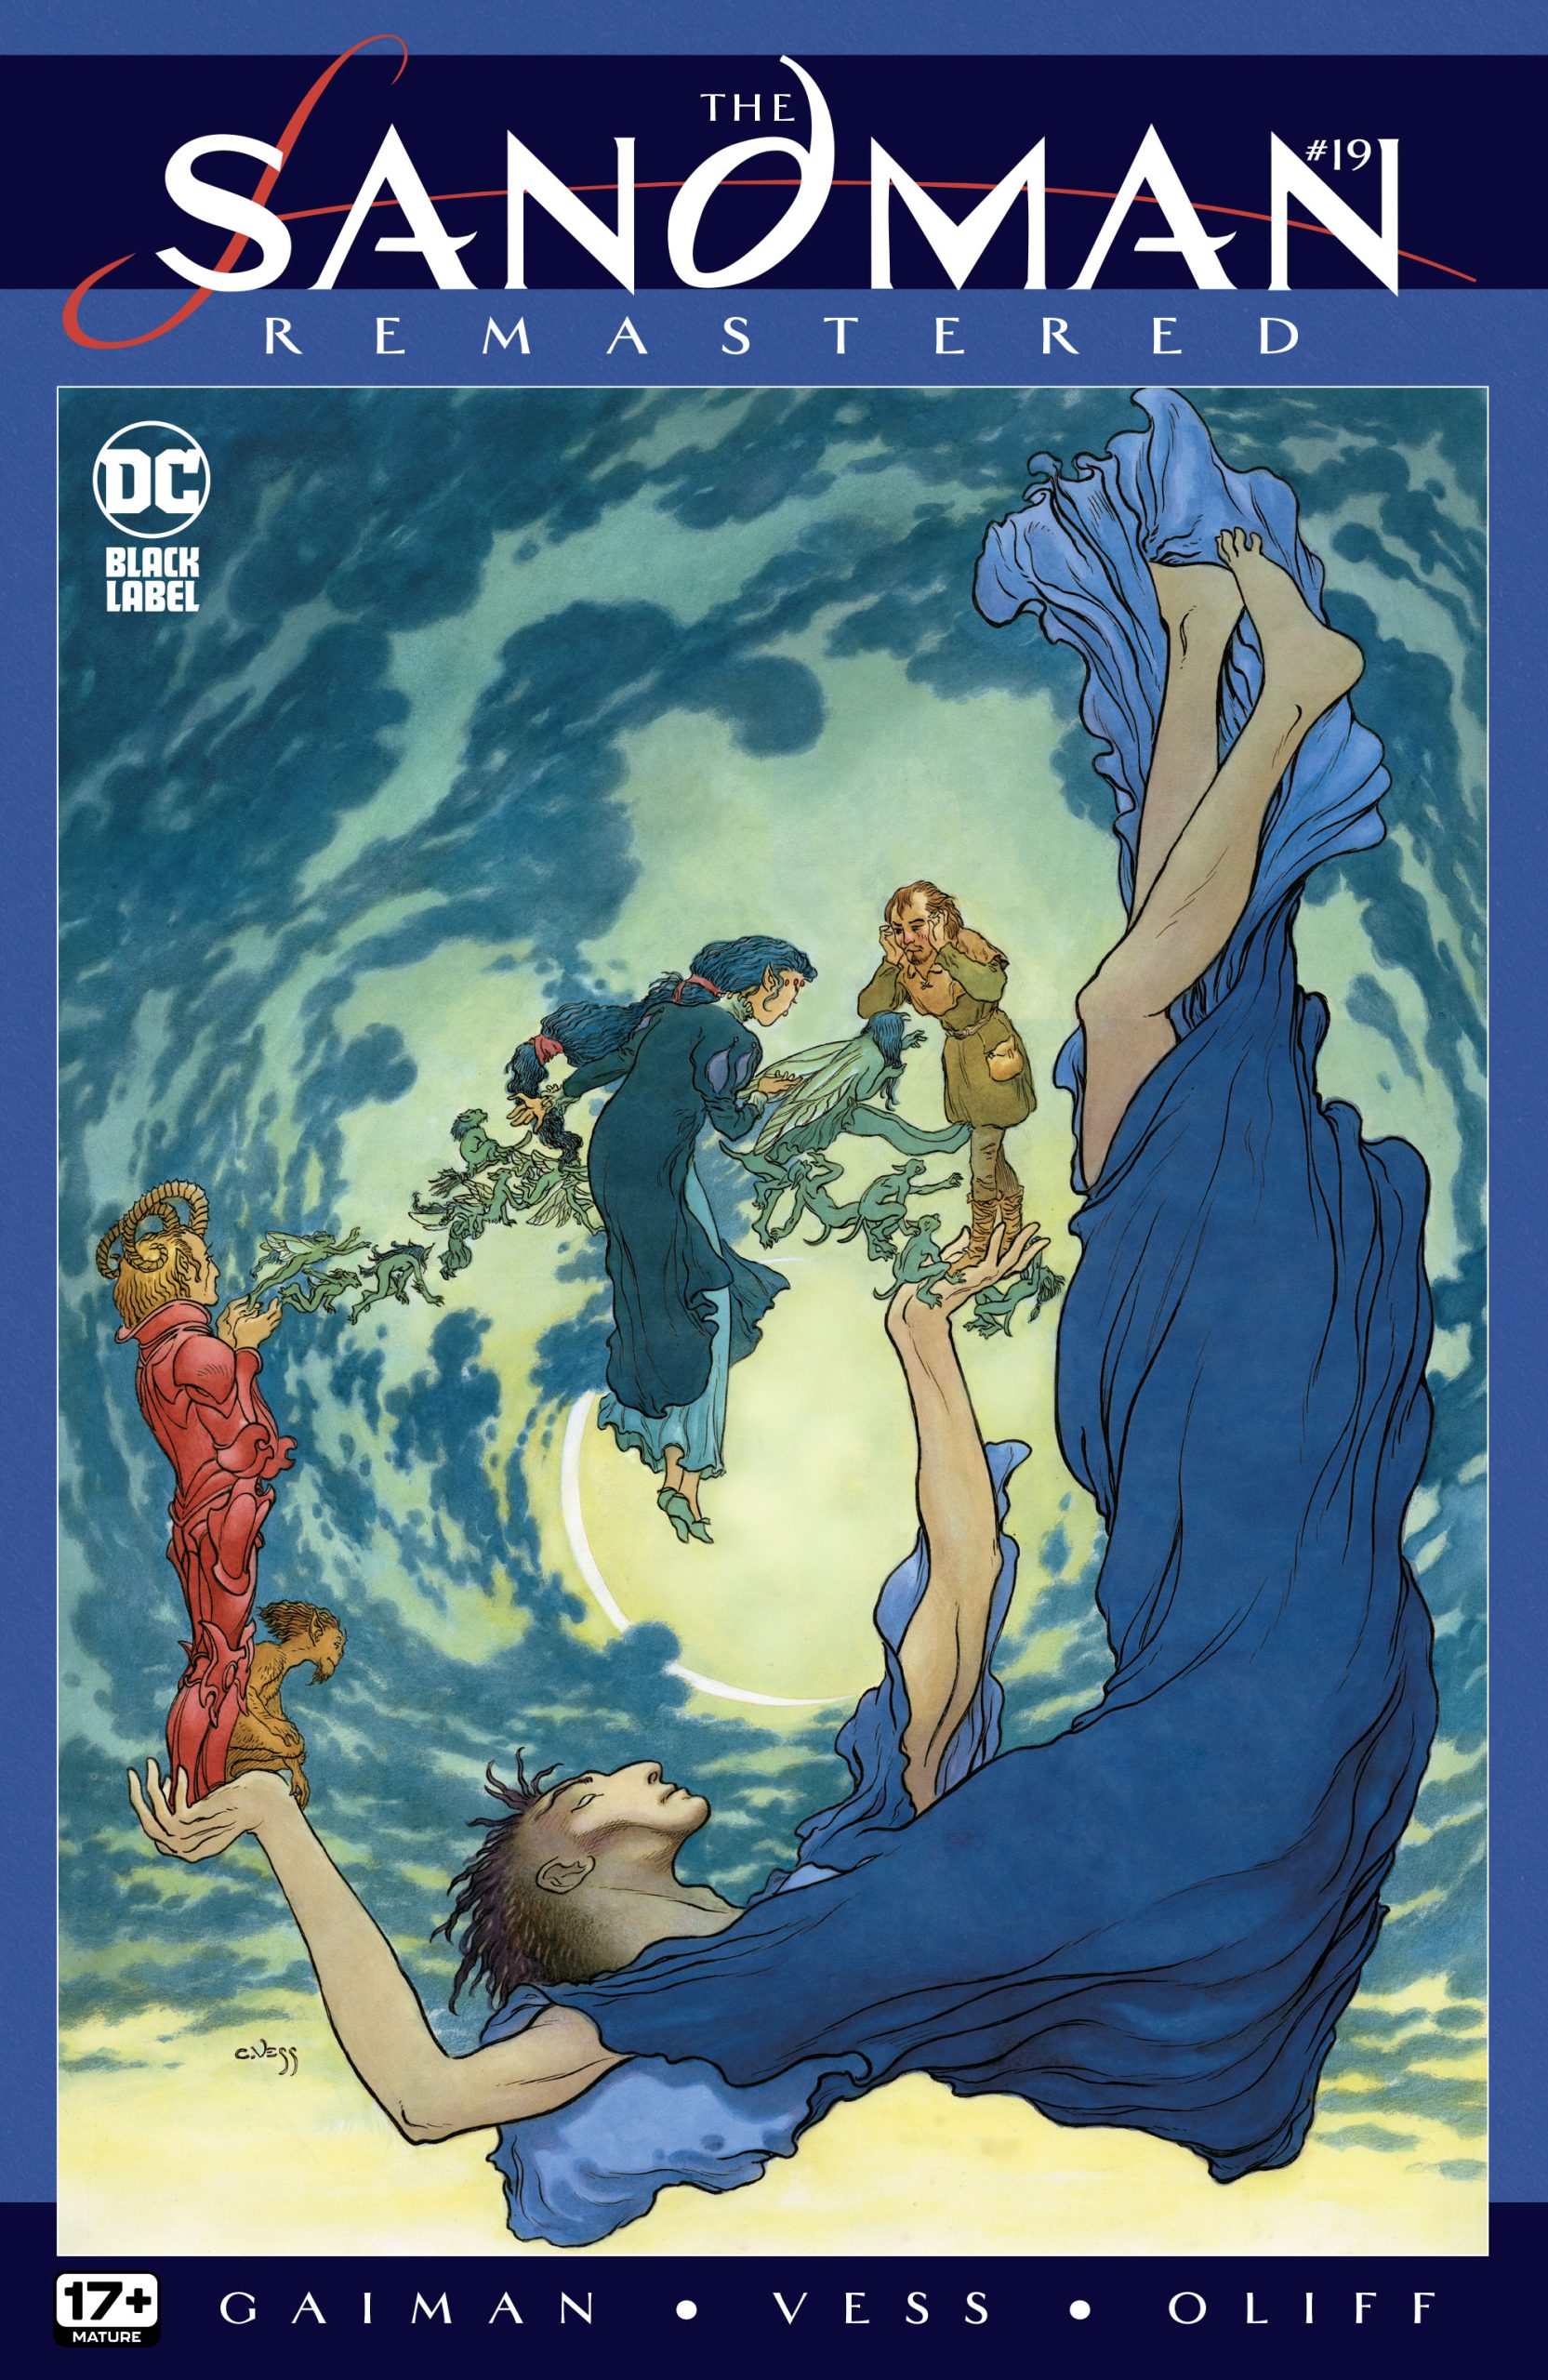 DC Preview: The Sandman #19 Remastered